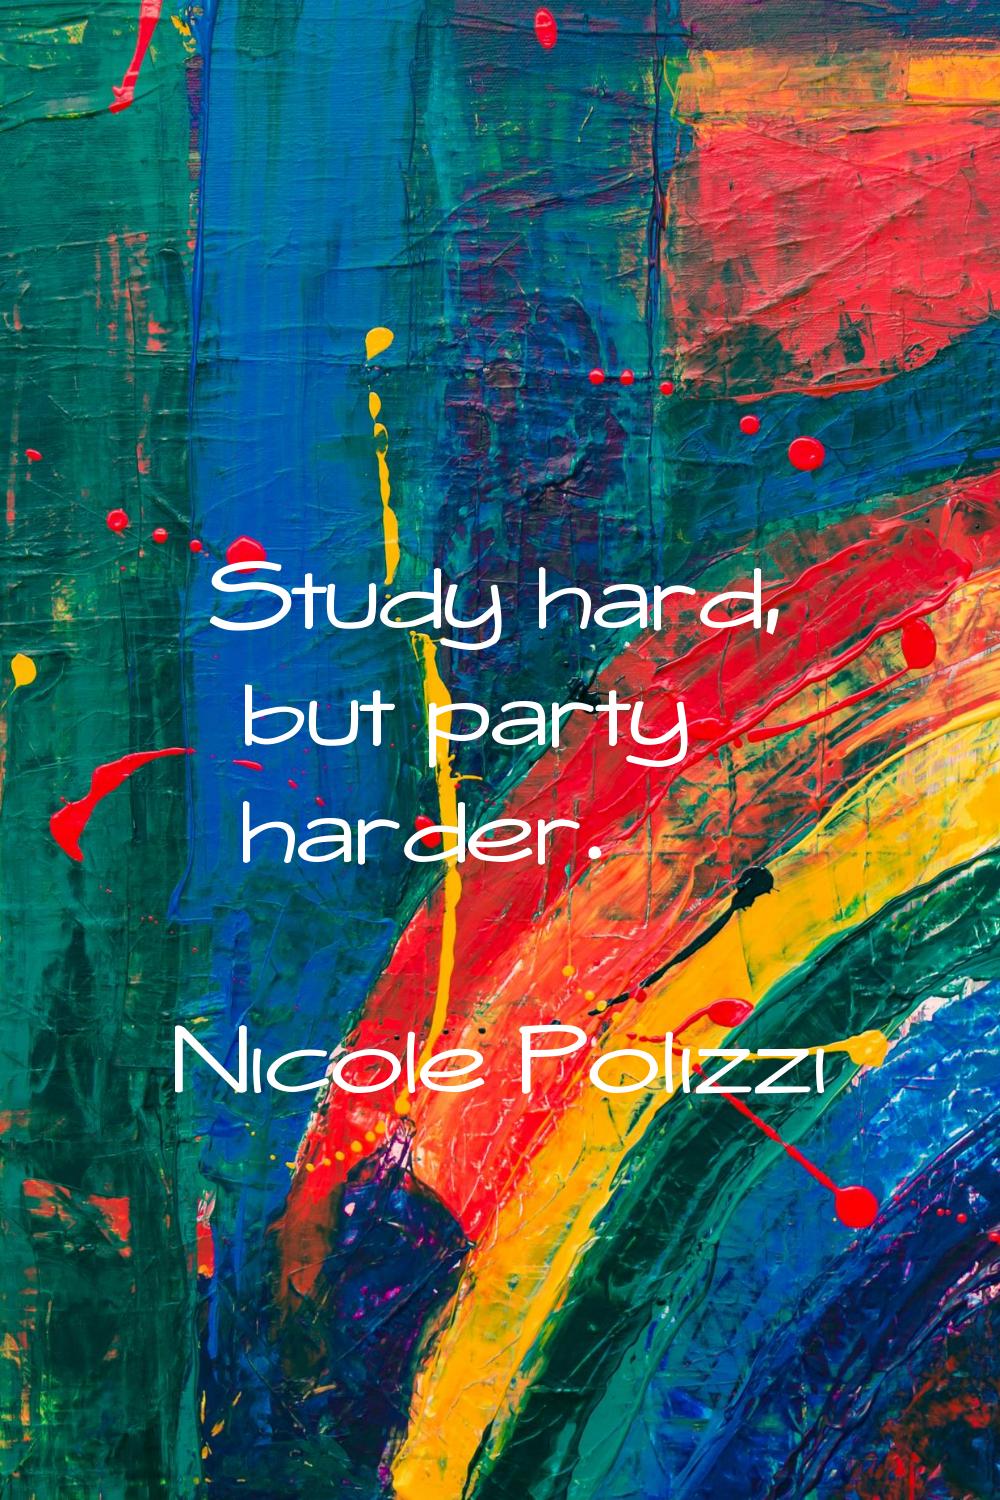 Study hard, but party harder.